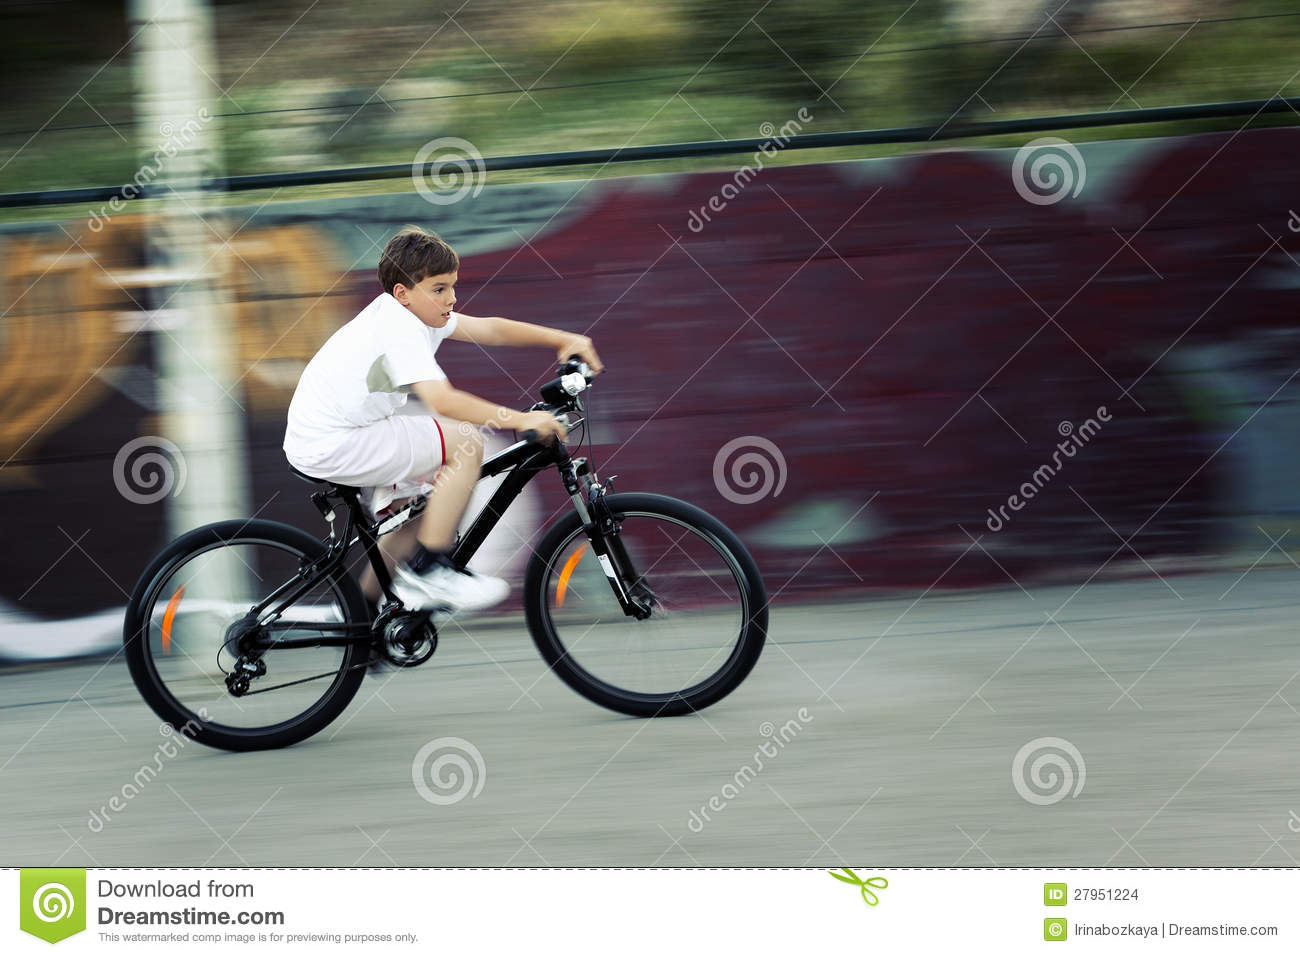 Fast Bike Ride Stock Images   Image  27951224